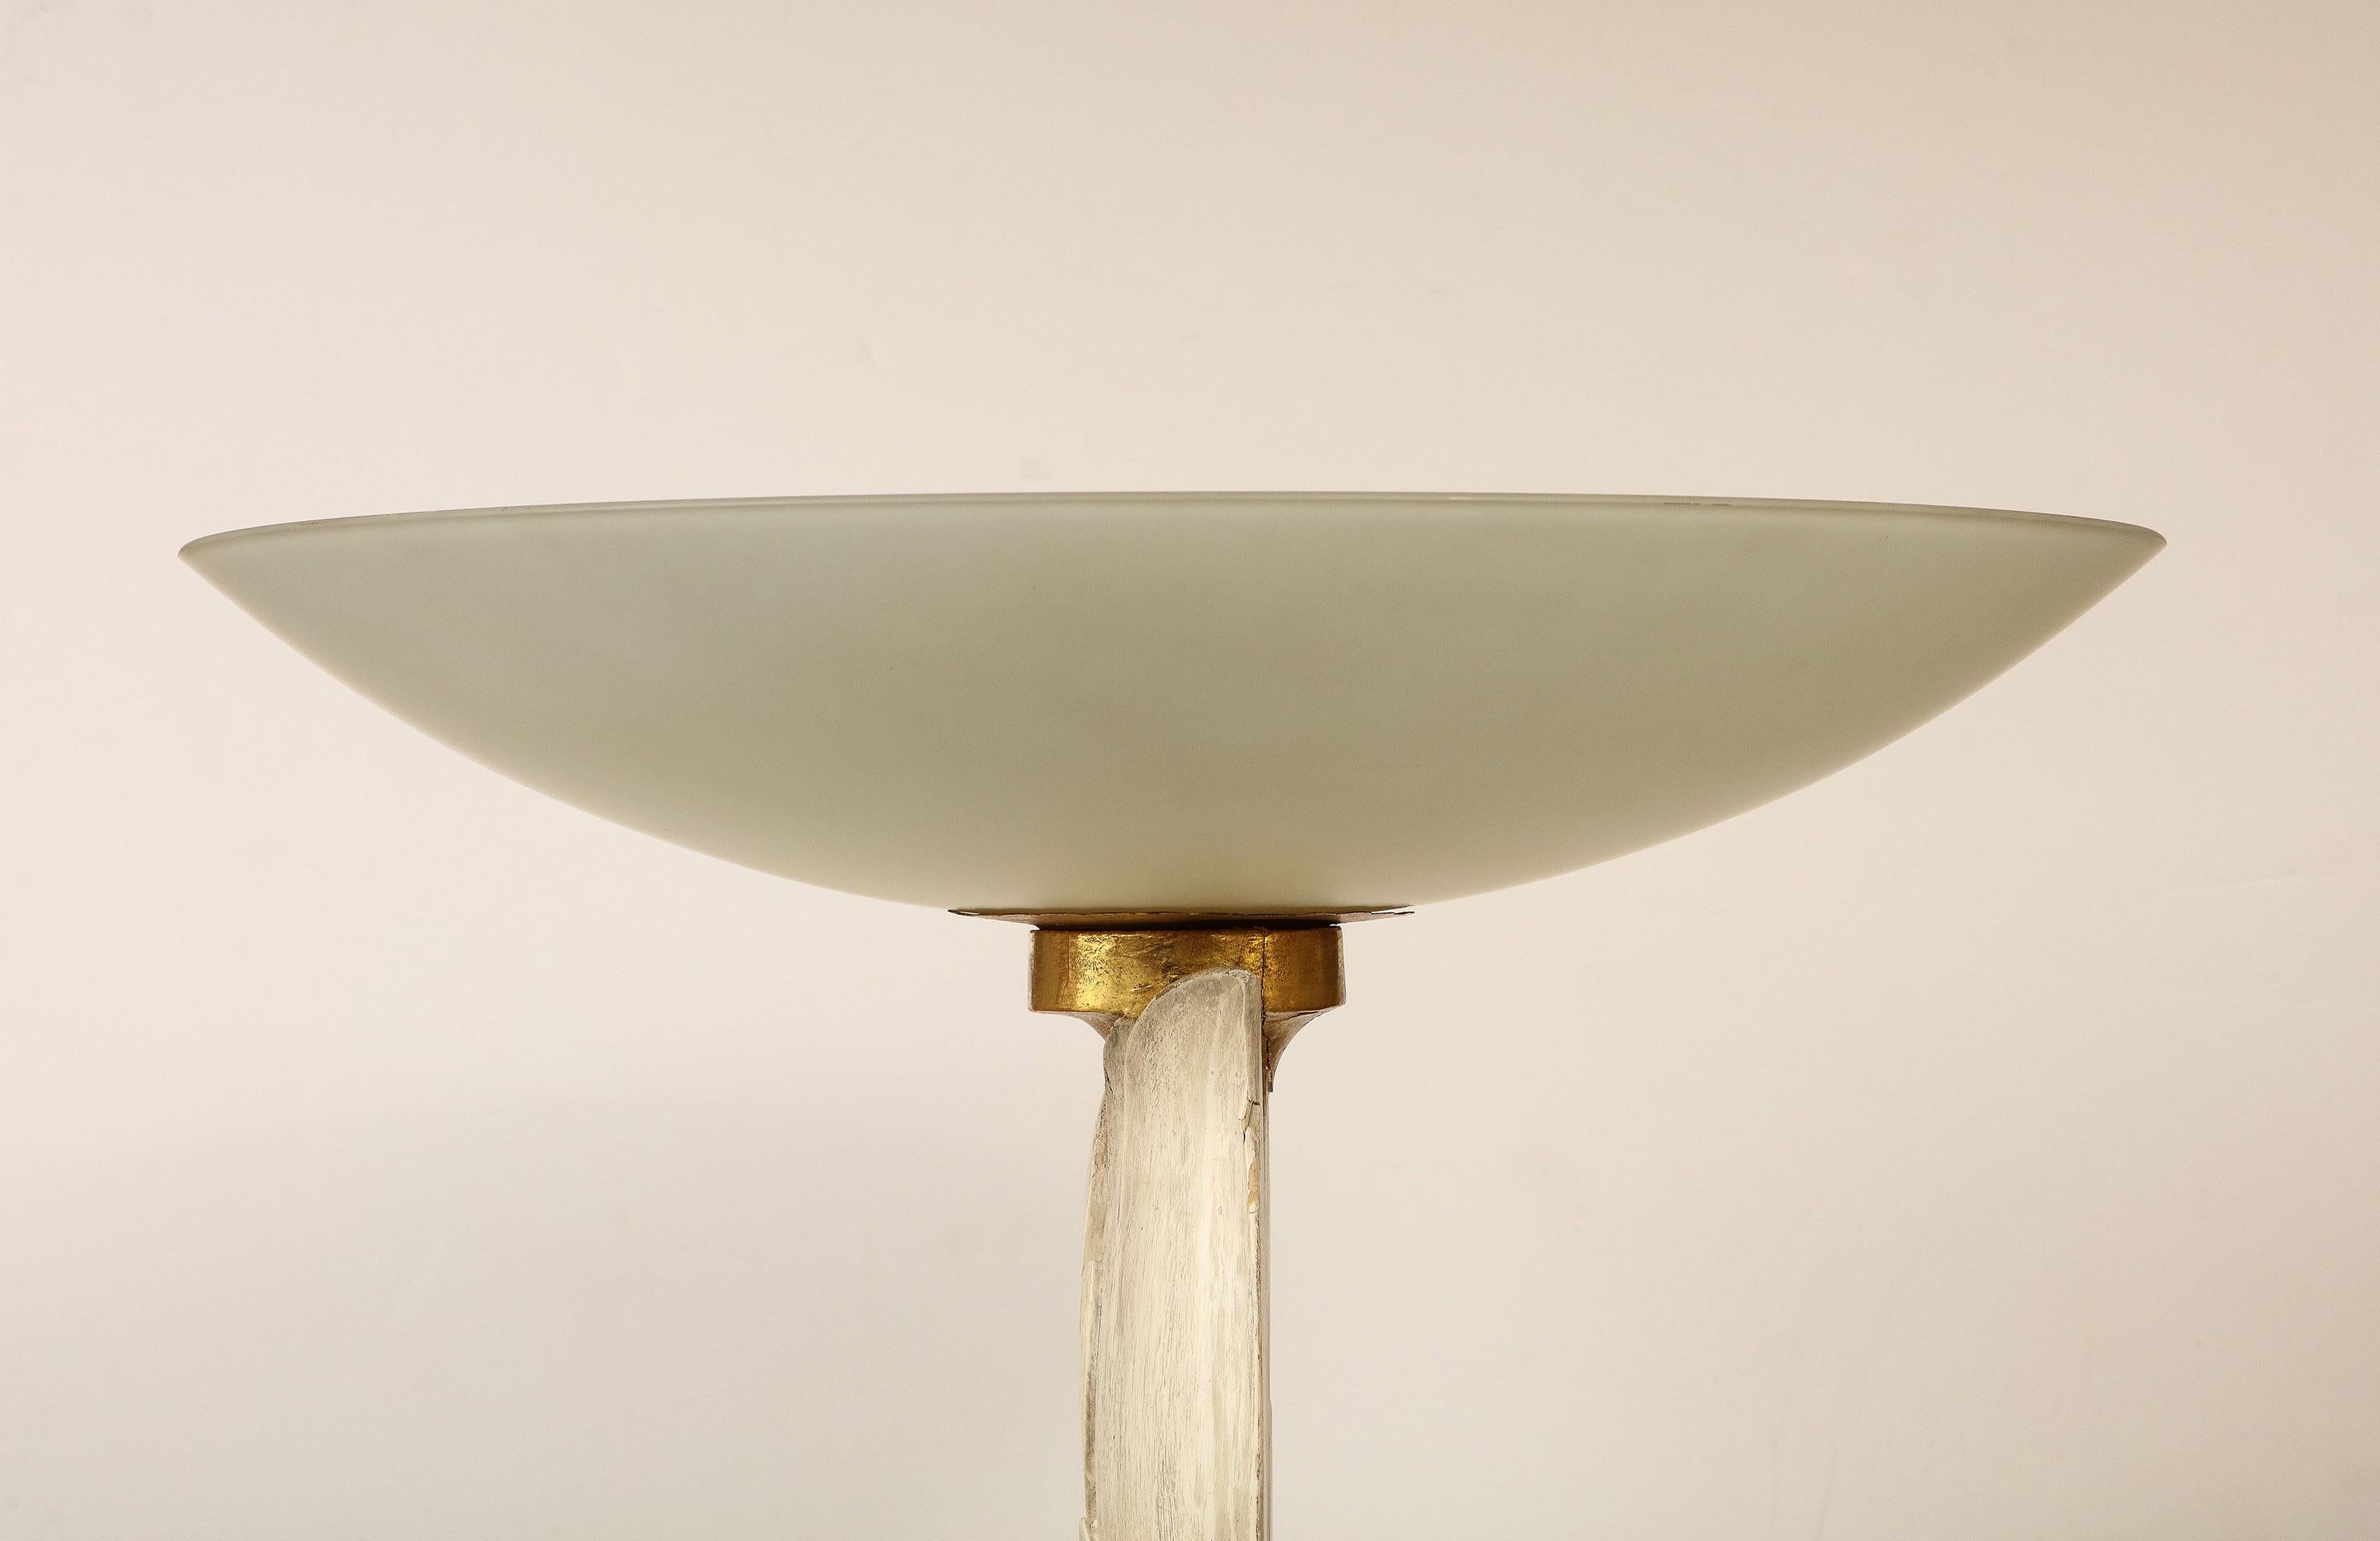 French Art Deco Floor lamp having a carved and painted wood shaft in a foliage motif  topped with frosted glass diffuser, on a rectangular painted wood base with brass and giltwood trim. The base on wheels. 